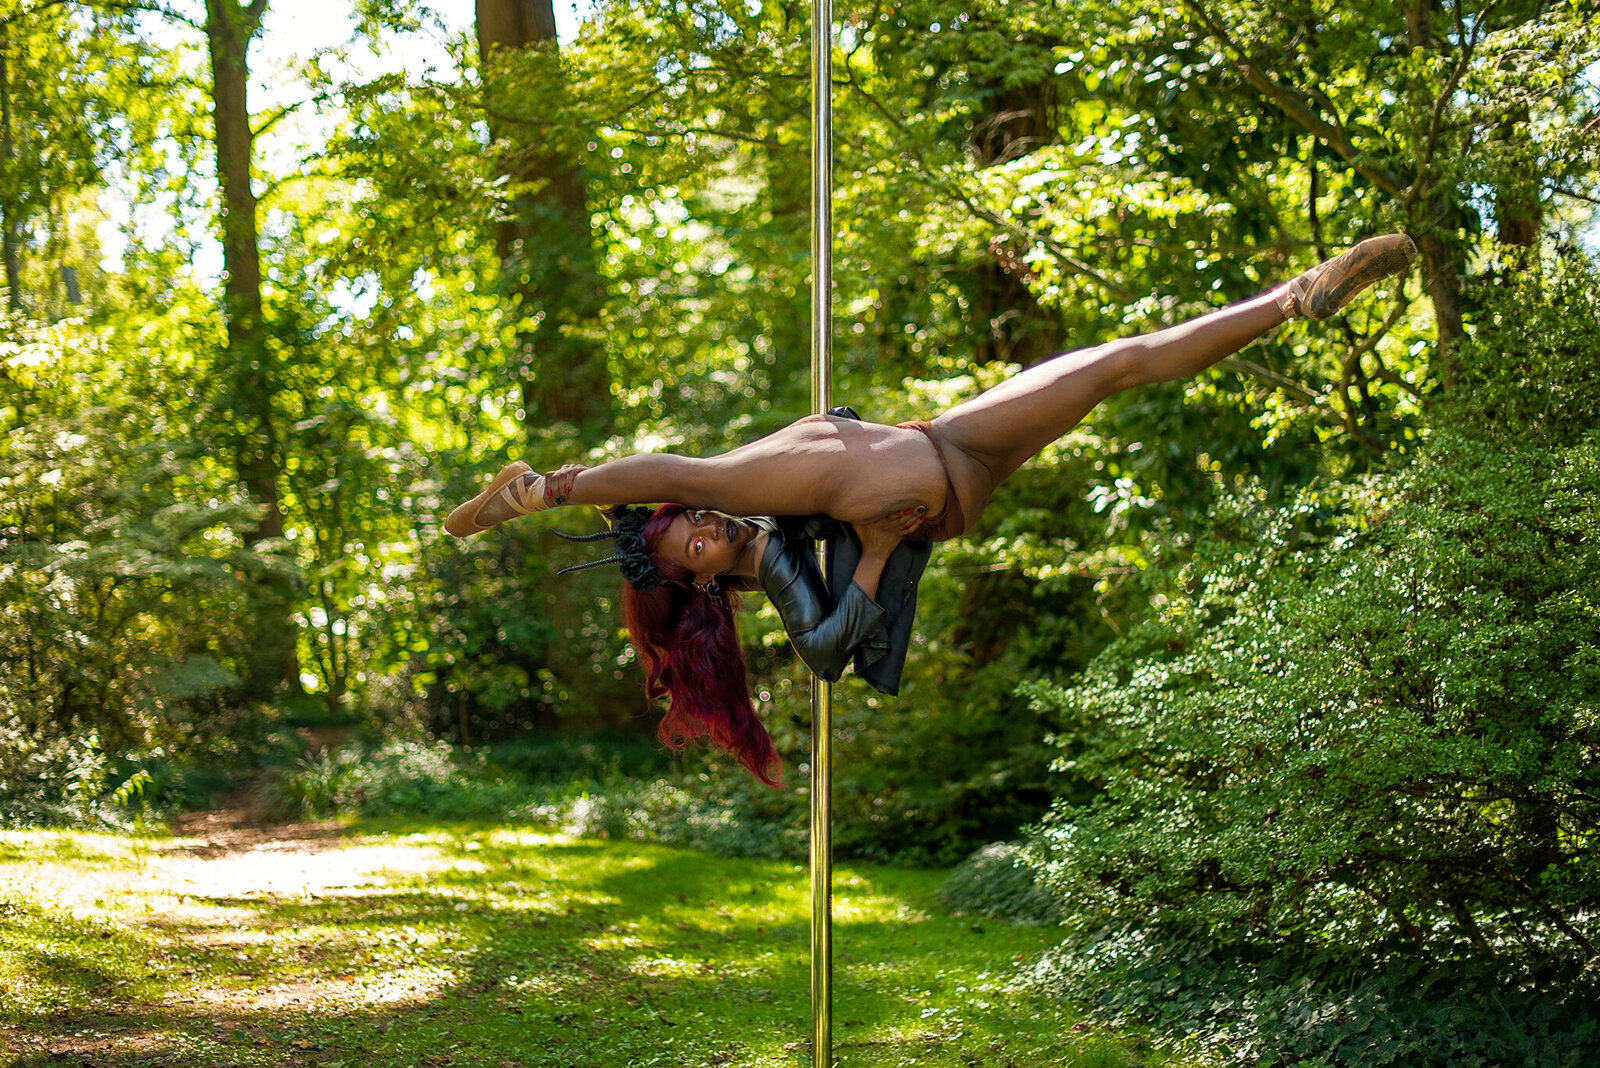 Snapzbytie - Flying in the Forest Pole Photoshoot - Central Maryland